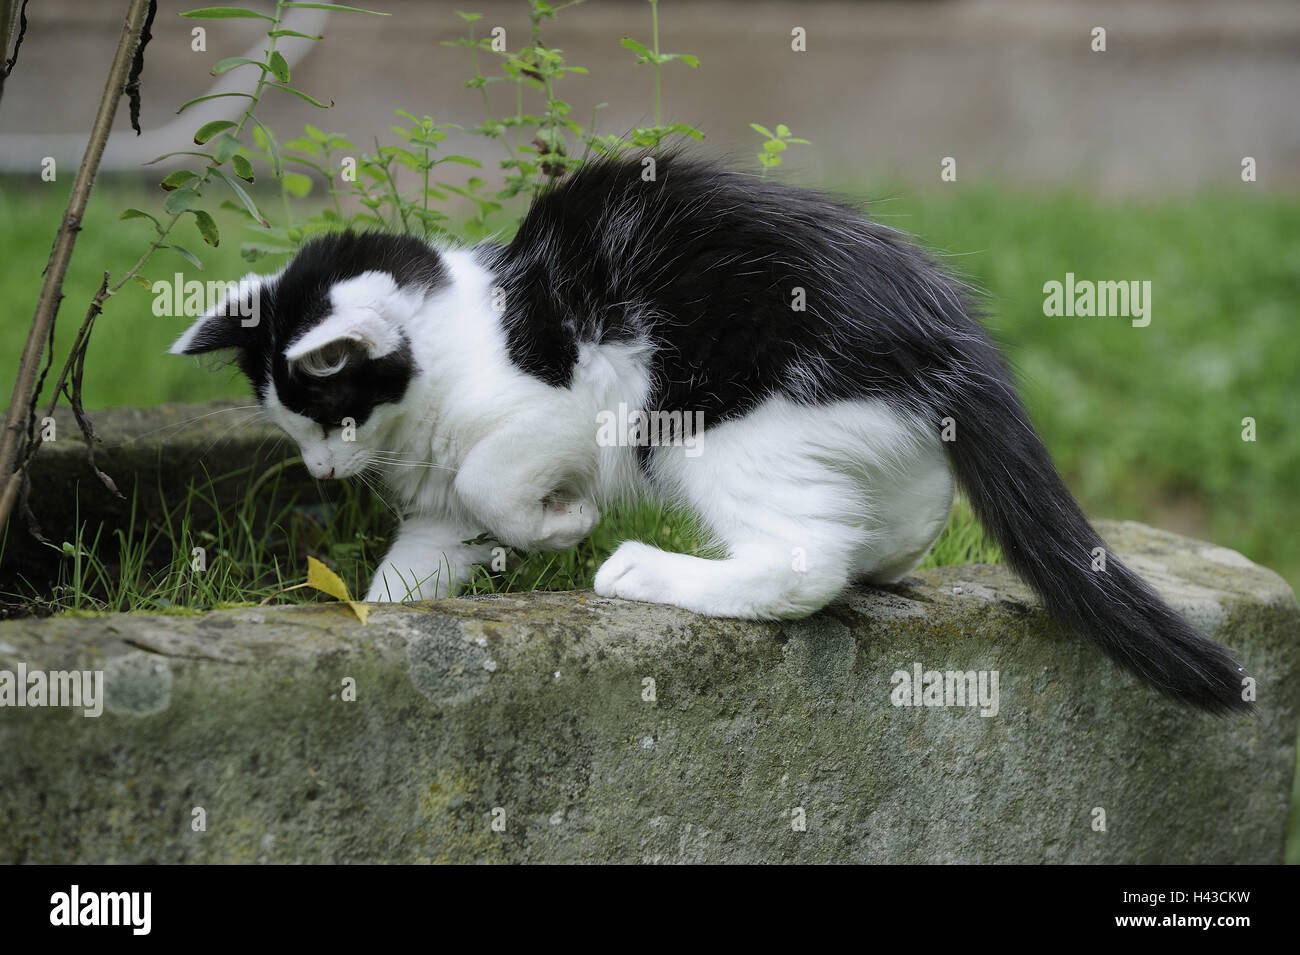 Garden, wall, grass, cat, black-and-white, play, animal, mammal, house cat, pet, outside, curiosity, loses, side view, Stock Photo